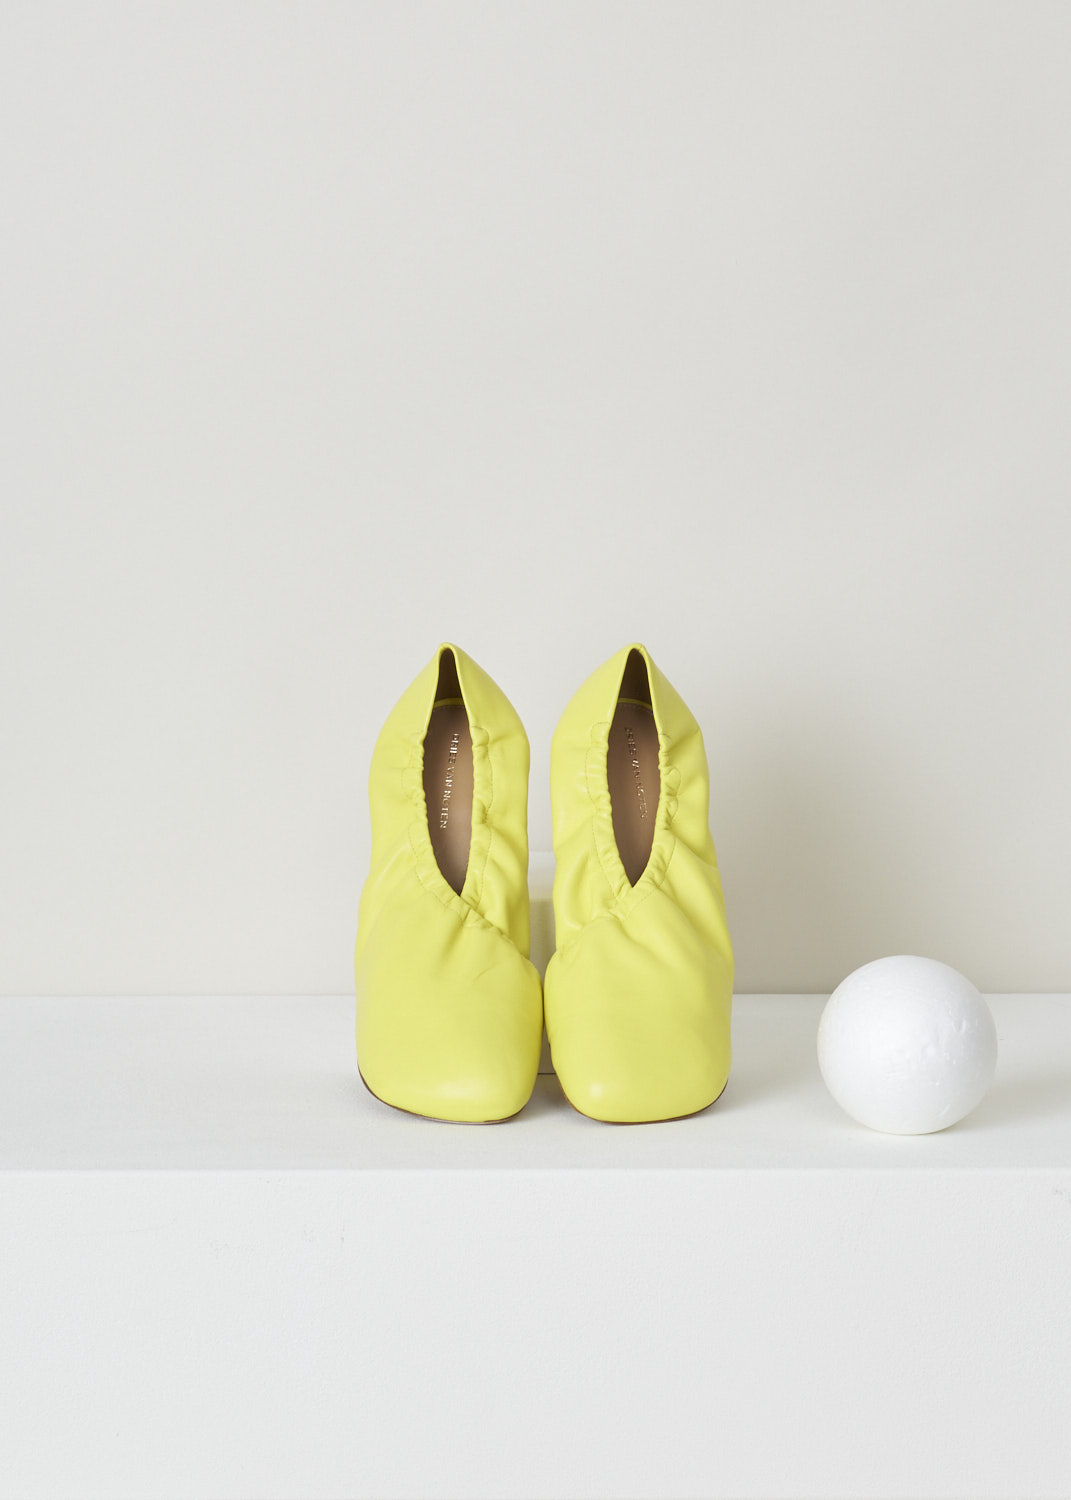 Dries van Noten, Yellow pump with an elastic fold-over vamp, WS211_138_H80_QU132_lime201, yellow, top, Yellow pumps made entirely out of soft and smooth calfskin. A quirky feature on this model is the elastic topline which folds over the toe vamp, ensuring a unique design feature. The toe vamp comes in a square format. Furthermore the heel is covered in yellow coloured leather.

Heel height: 7.5 cm / 2.95 inch.